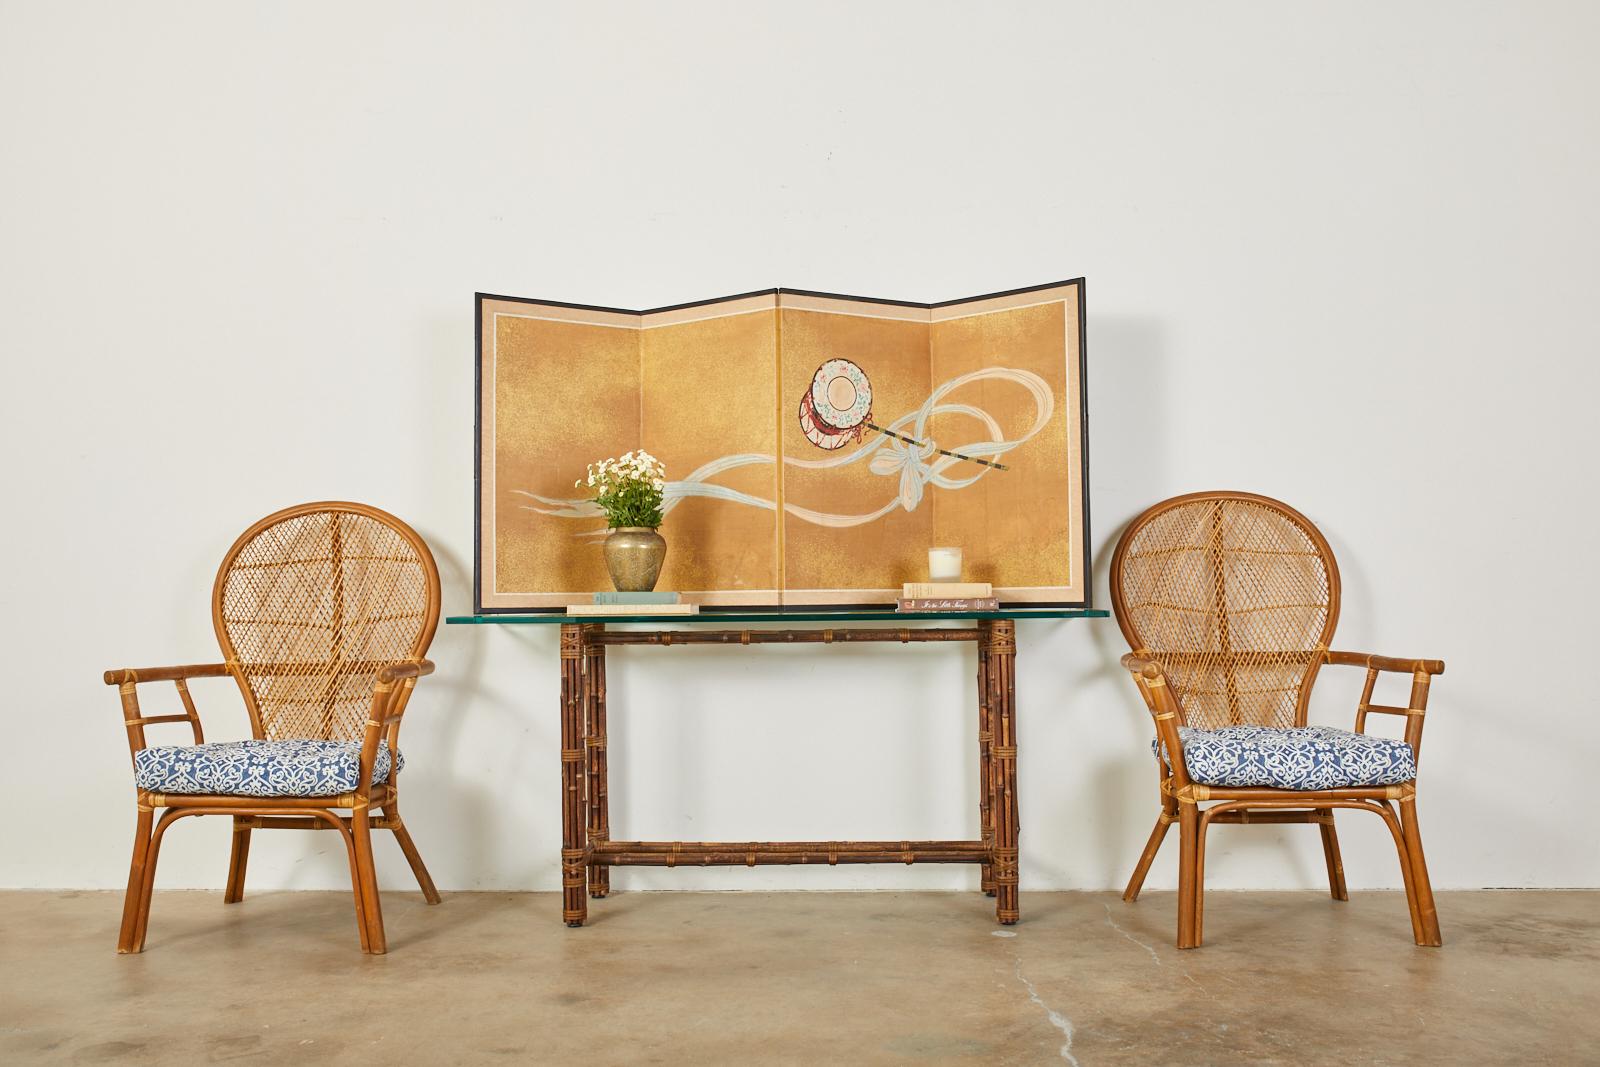 Midcentury set of four peacock or fan back dining armchairs made in the Hollywood Florida Regency taste. The chairs feature a balloon shaped back with an open lattice fretwork design. The flat arms are curved and horseshoe shaped. The chairs are